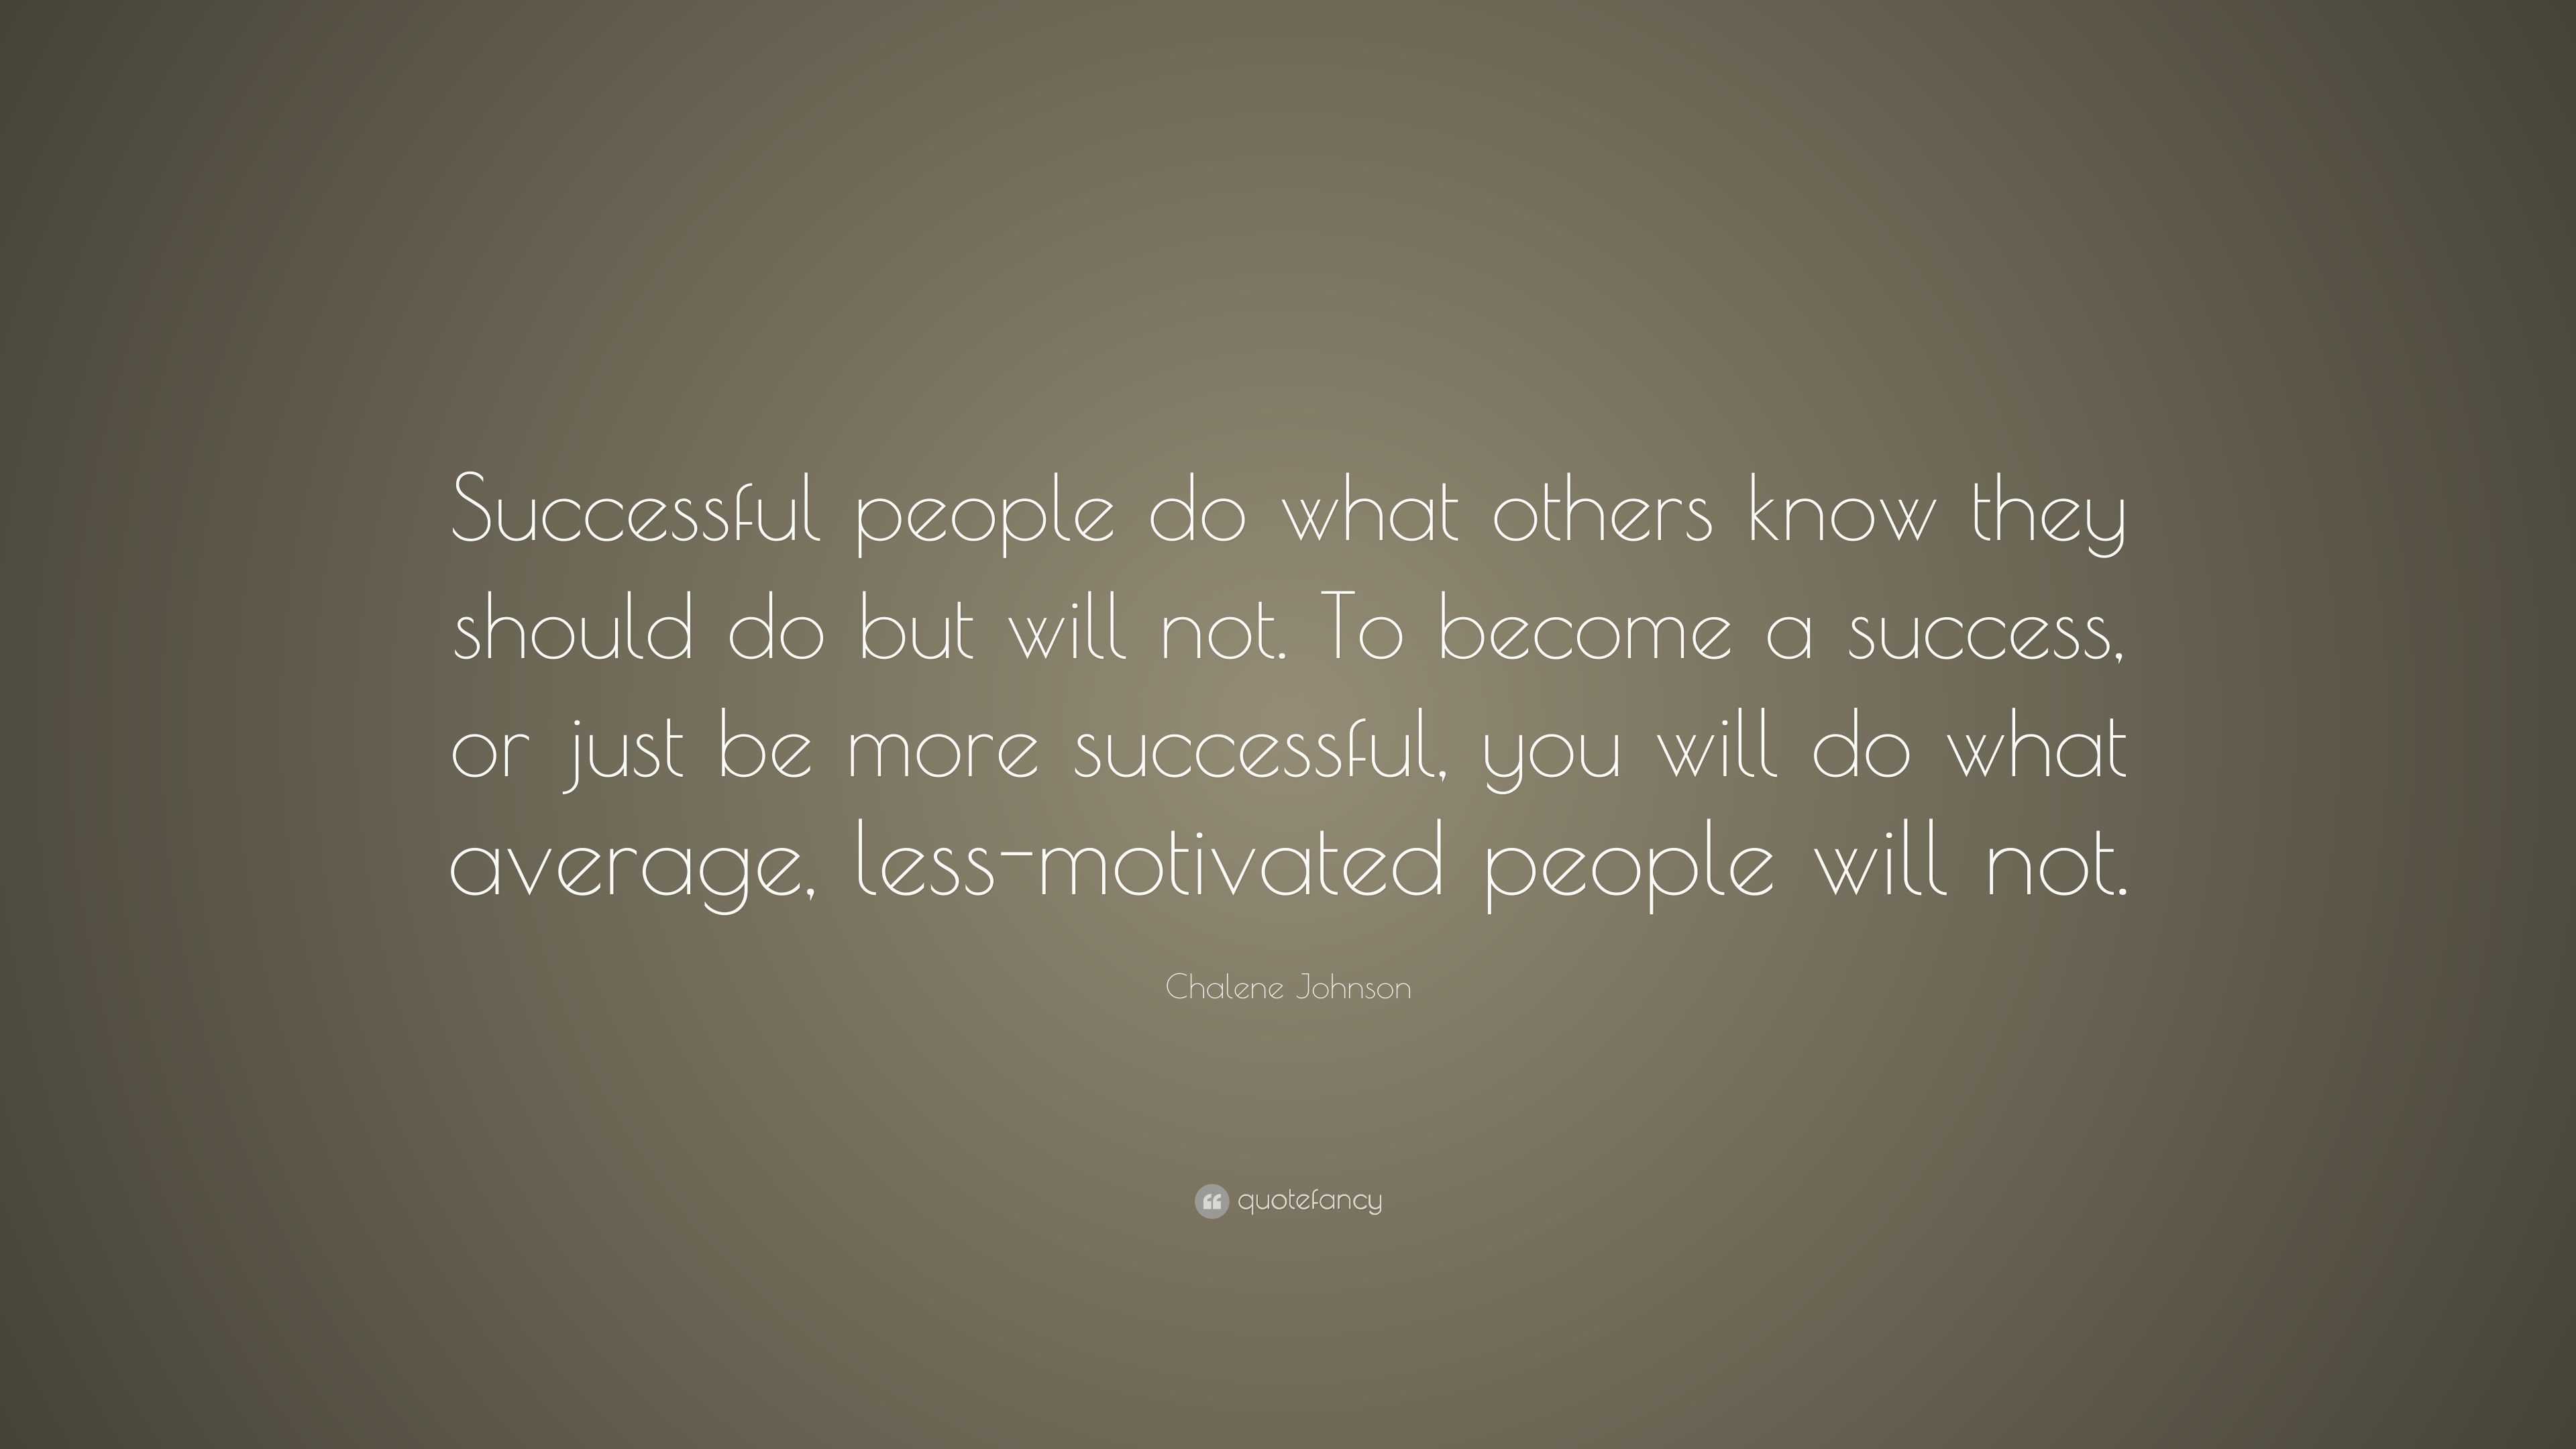 Chalene Johnson Quote: “Successful people do what others know they ...